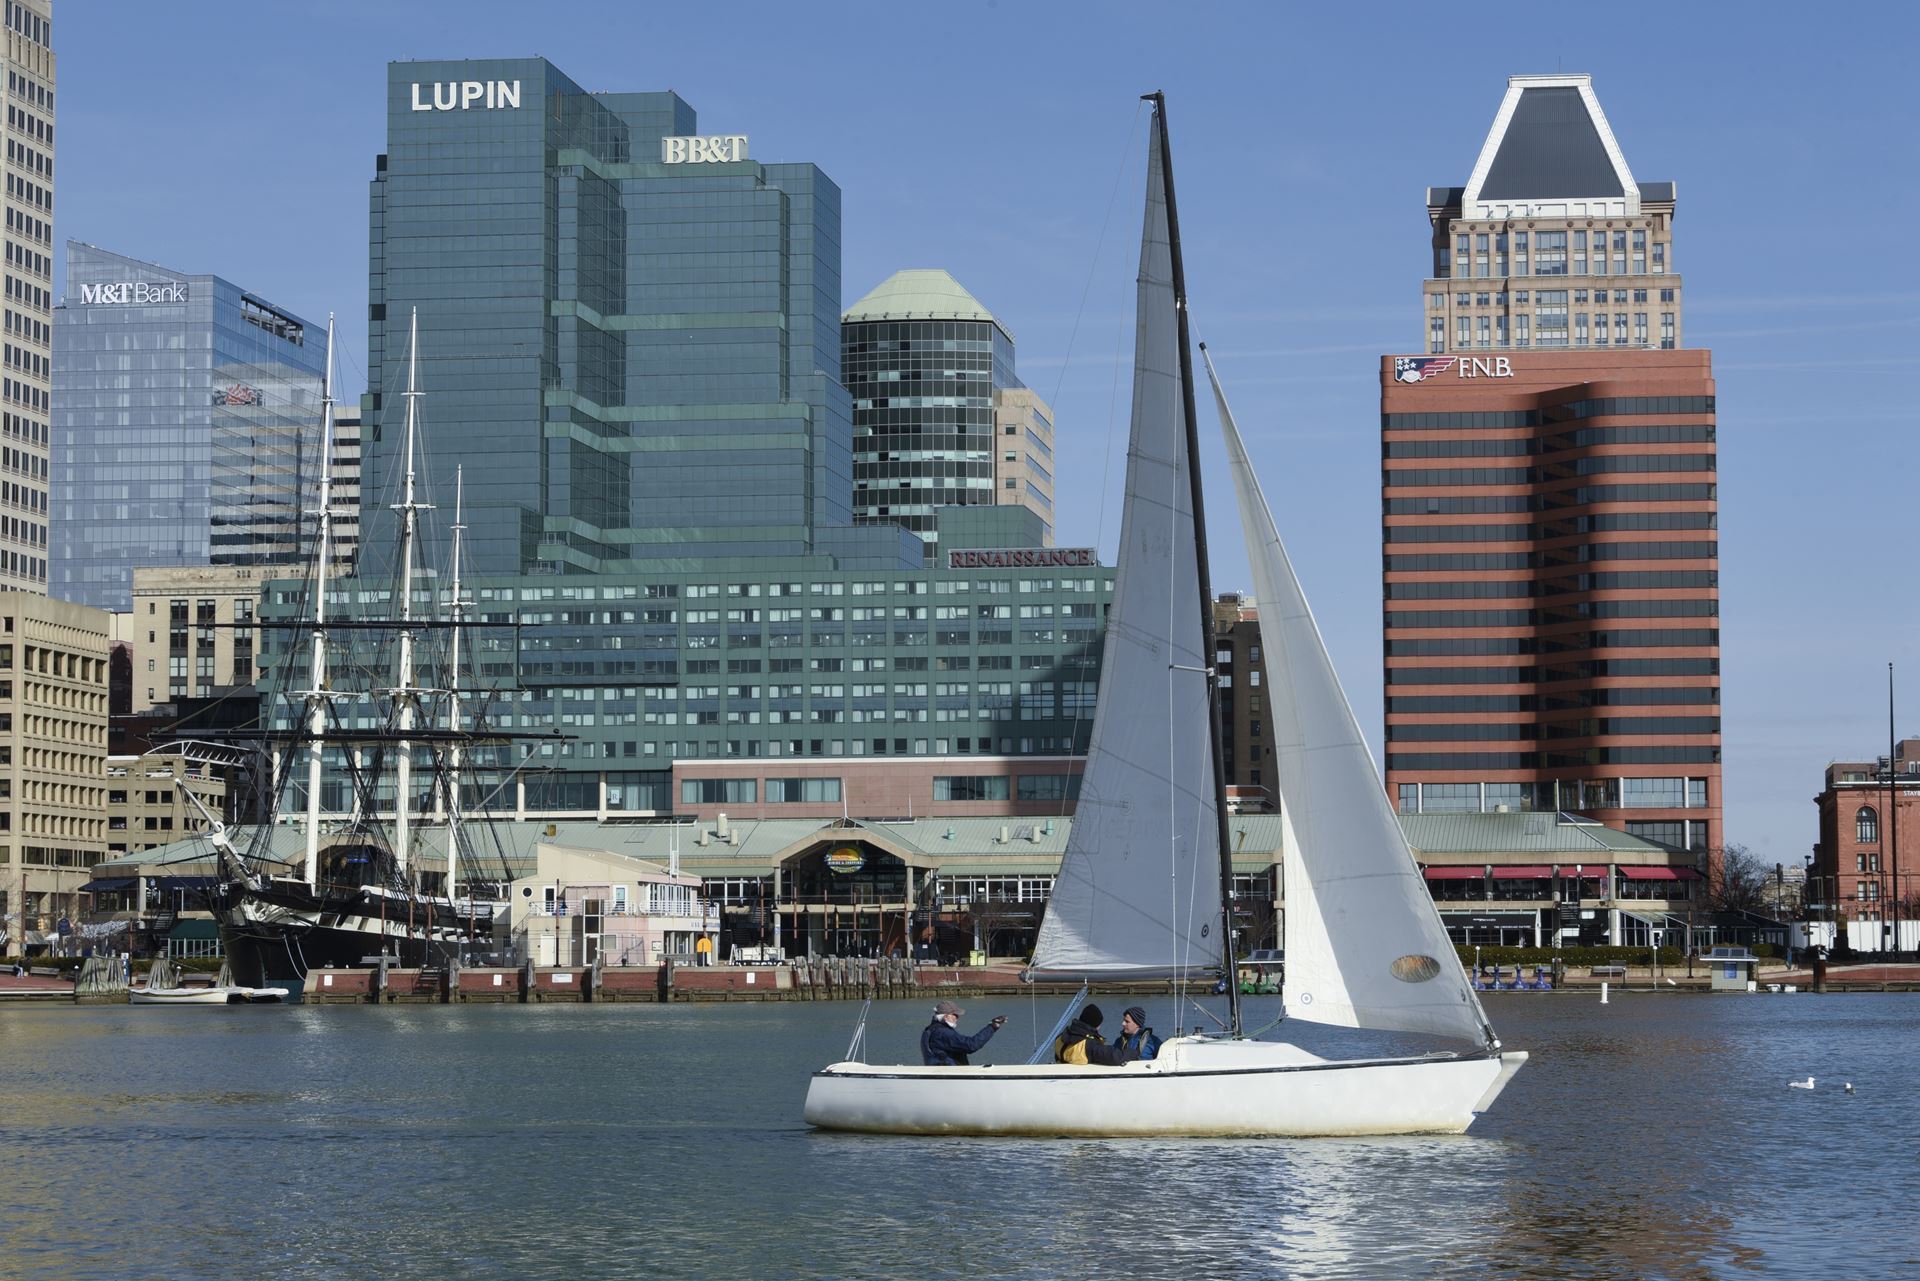 A Sonar sailboat meanders in Baltimore Inner Harbor on a sunny day